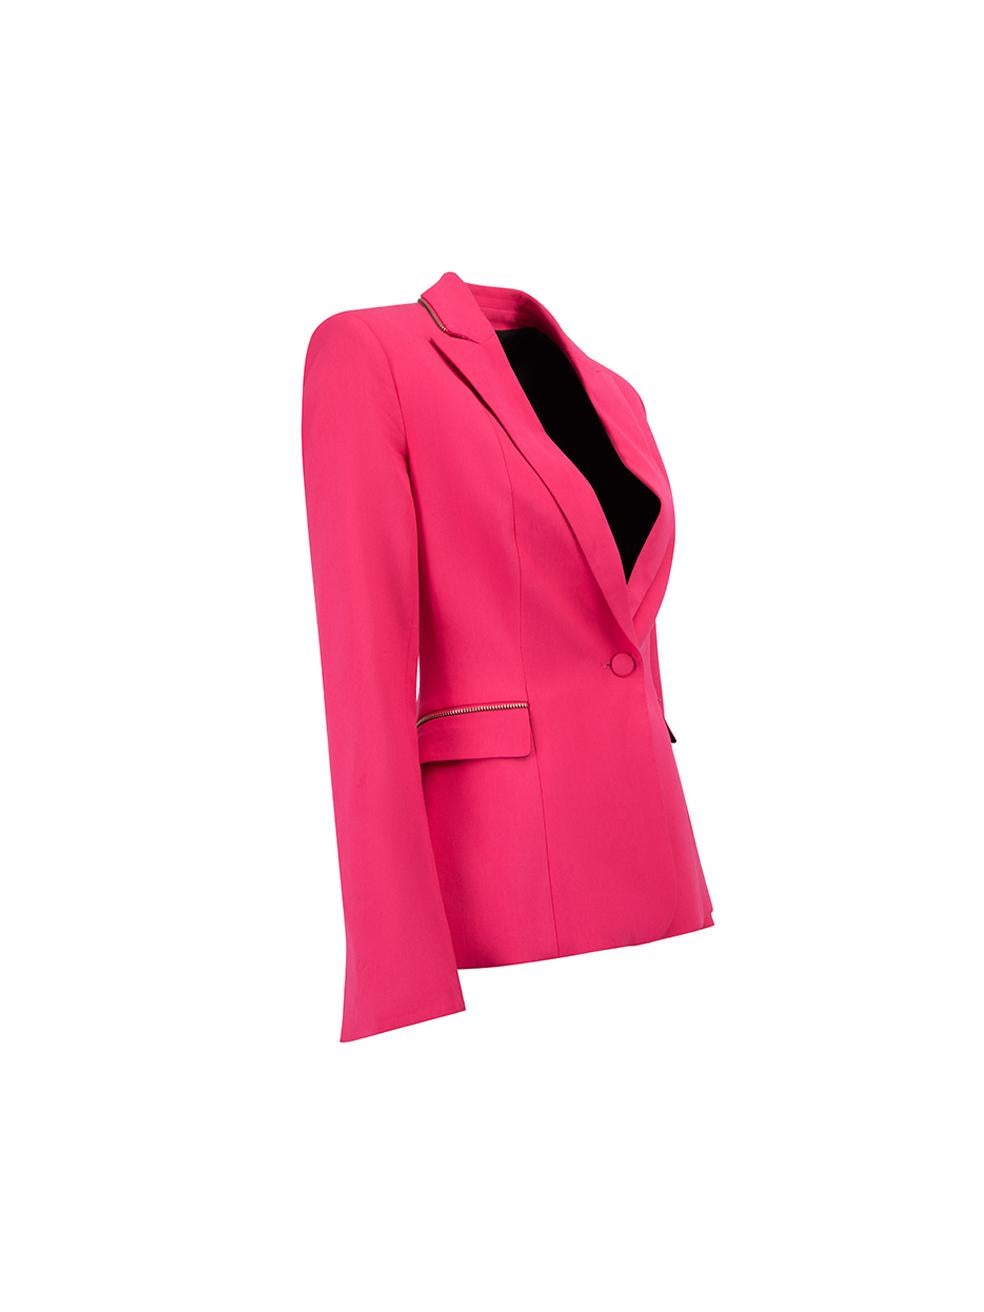 CONDITION is Very good. Hardly any visible wear to jacket is evident on this used Karl Lagerfeld designer resale item.




Details


Pink

Viscose

Single breasted blazer

Zip detail on lapel and pockets

Front side pockets with flaps





Made in